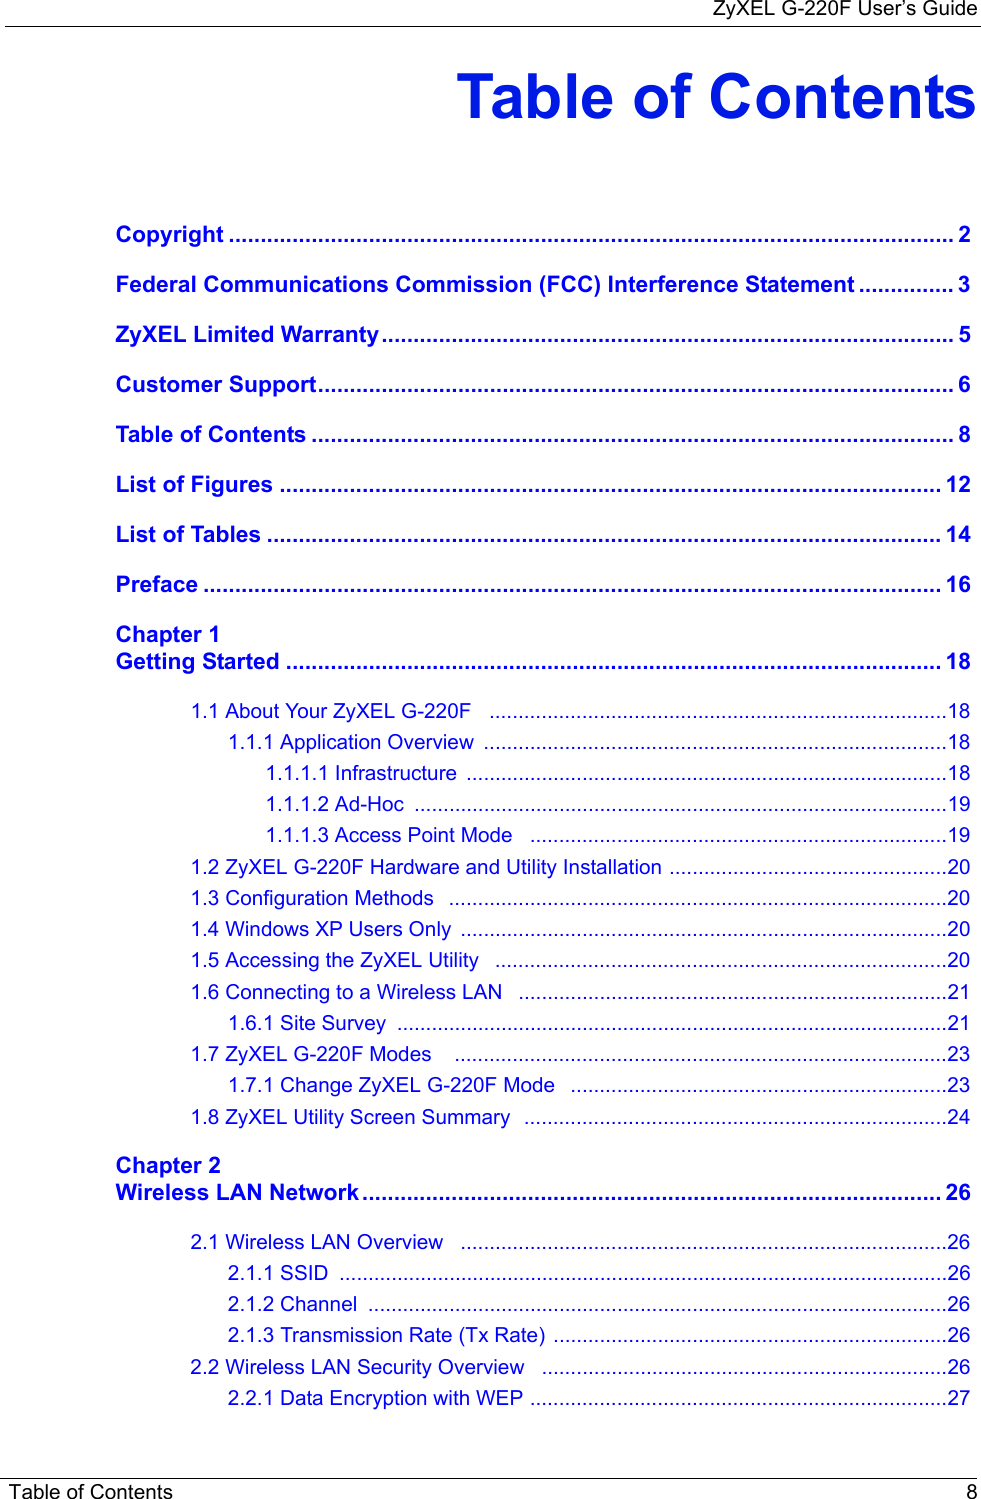 ZyXEL G-220F User’s GuideTable of Contents 8Table of ContentsCopyright .................................................................................................................. 2Federal Communications Commission (FCC) Interference Statement ............... 3ZyXEL Limited Warranty.......................................................................................... 5Customer Support.................................................................................................... 6Table of Contents ..................................................................................................... 8List of Figures ........................................................................................................ 12List of Tables .......................................................................................................... 14Preface .................................................................................................................... 16Chapter 1Getting Started ....................................................................................................... 181.1 About Your ZyXEL G-220F   ...............................................................................181.1.1 Application Overview  ................................................................................181.1.1.1 Infrastructure  ...................................................................................181.1.1.2 Ad-Hoc  ............................................................................................191.1.1.3 Access Point Mode   ........................................................................191.2 ZyXEL G-220F Hardware and Utility Installation ................................................201.3 Configuration Methods   ......................................................................................201.4 Windows XP Users Only  ....................................................................................201.5 Accessing the ZyXEL Utility   ..............................................................................201.6 Connecting to a Wireless LAN   ..........................................................................211.6.1 Site Survey  ...............................................................................................211.7 ZyXEL G-220F Modes    .....................................................................................231.7.1 Change ZyXEL G-220F Mode   .................................................................231.8 ZyXEL Utility Screen Summary  .........................................................................24Chapter 2Wireless LAN Network ........................................................................................... 262.1 Wireless LAN Overview   ....................................................................................262.1.1 SSID  .........................................................................................................262.1.2 Channel  ....................................................................................................262.1.3 Transmission Rate (Tx Rate) ....................................................................262.2 Wireless LAN Security Overview   ......................................................................262.2.1 Data Encryption with WEP ........................................................................27